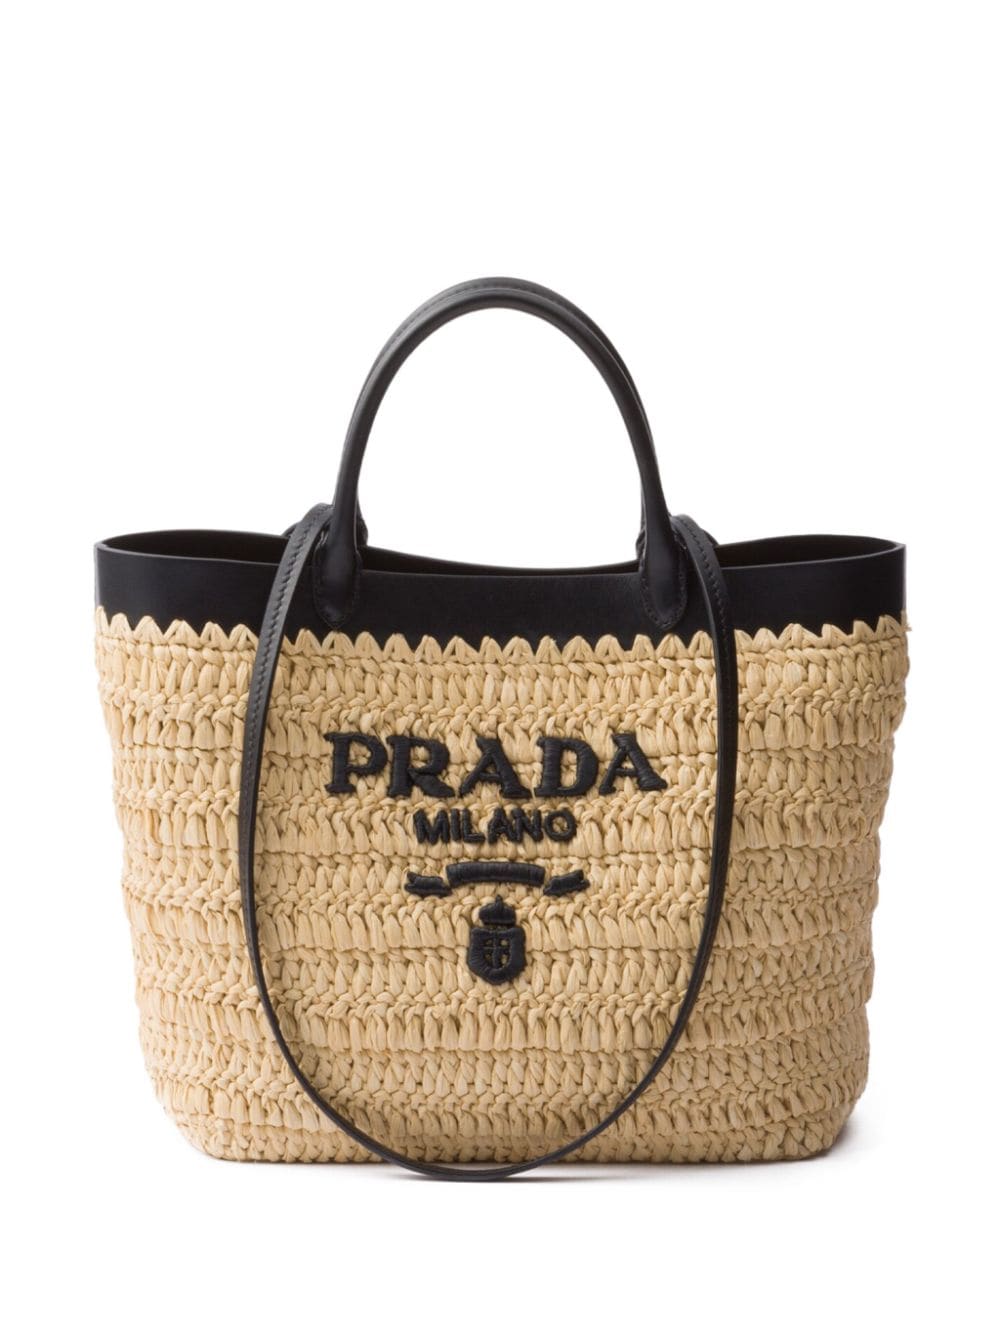 Prada leather-trimmed Woven Tote Bag